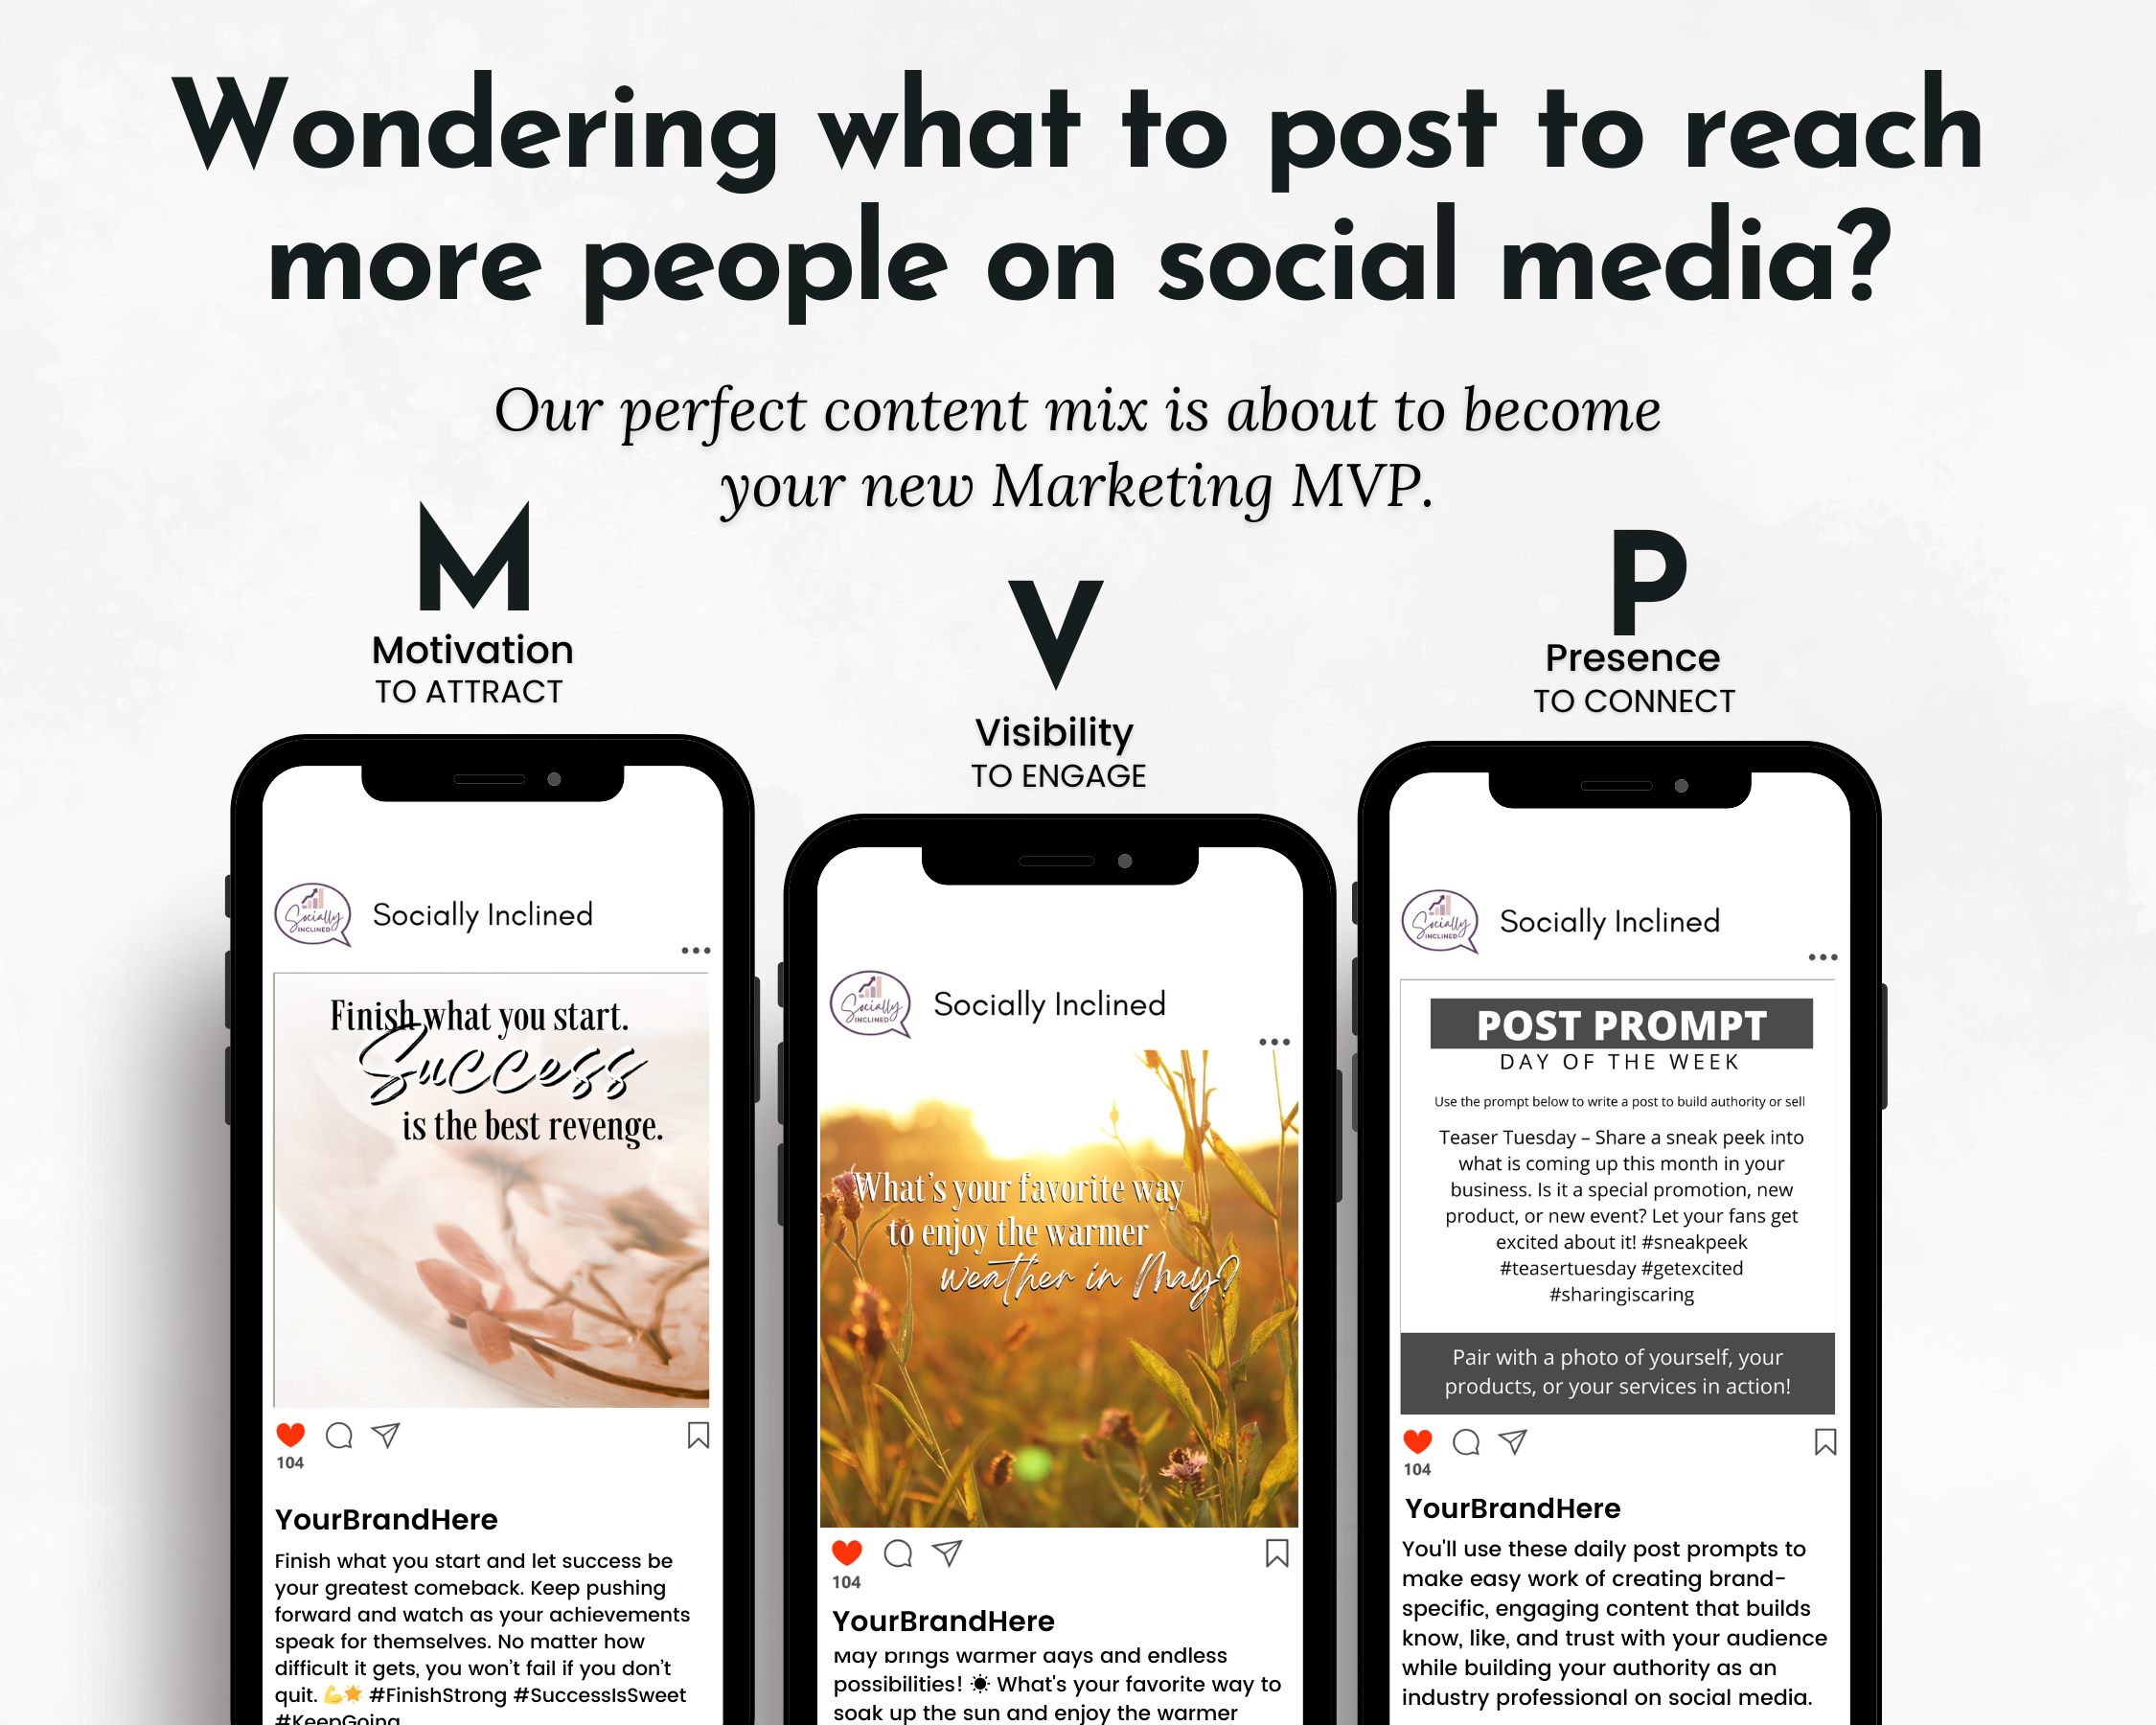 Three May Daily Posting Plans from Get Socially Inclined displaying social media marketing strategies with focus on attraction, visibility, and presence to boost engagement through daily posting plans.